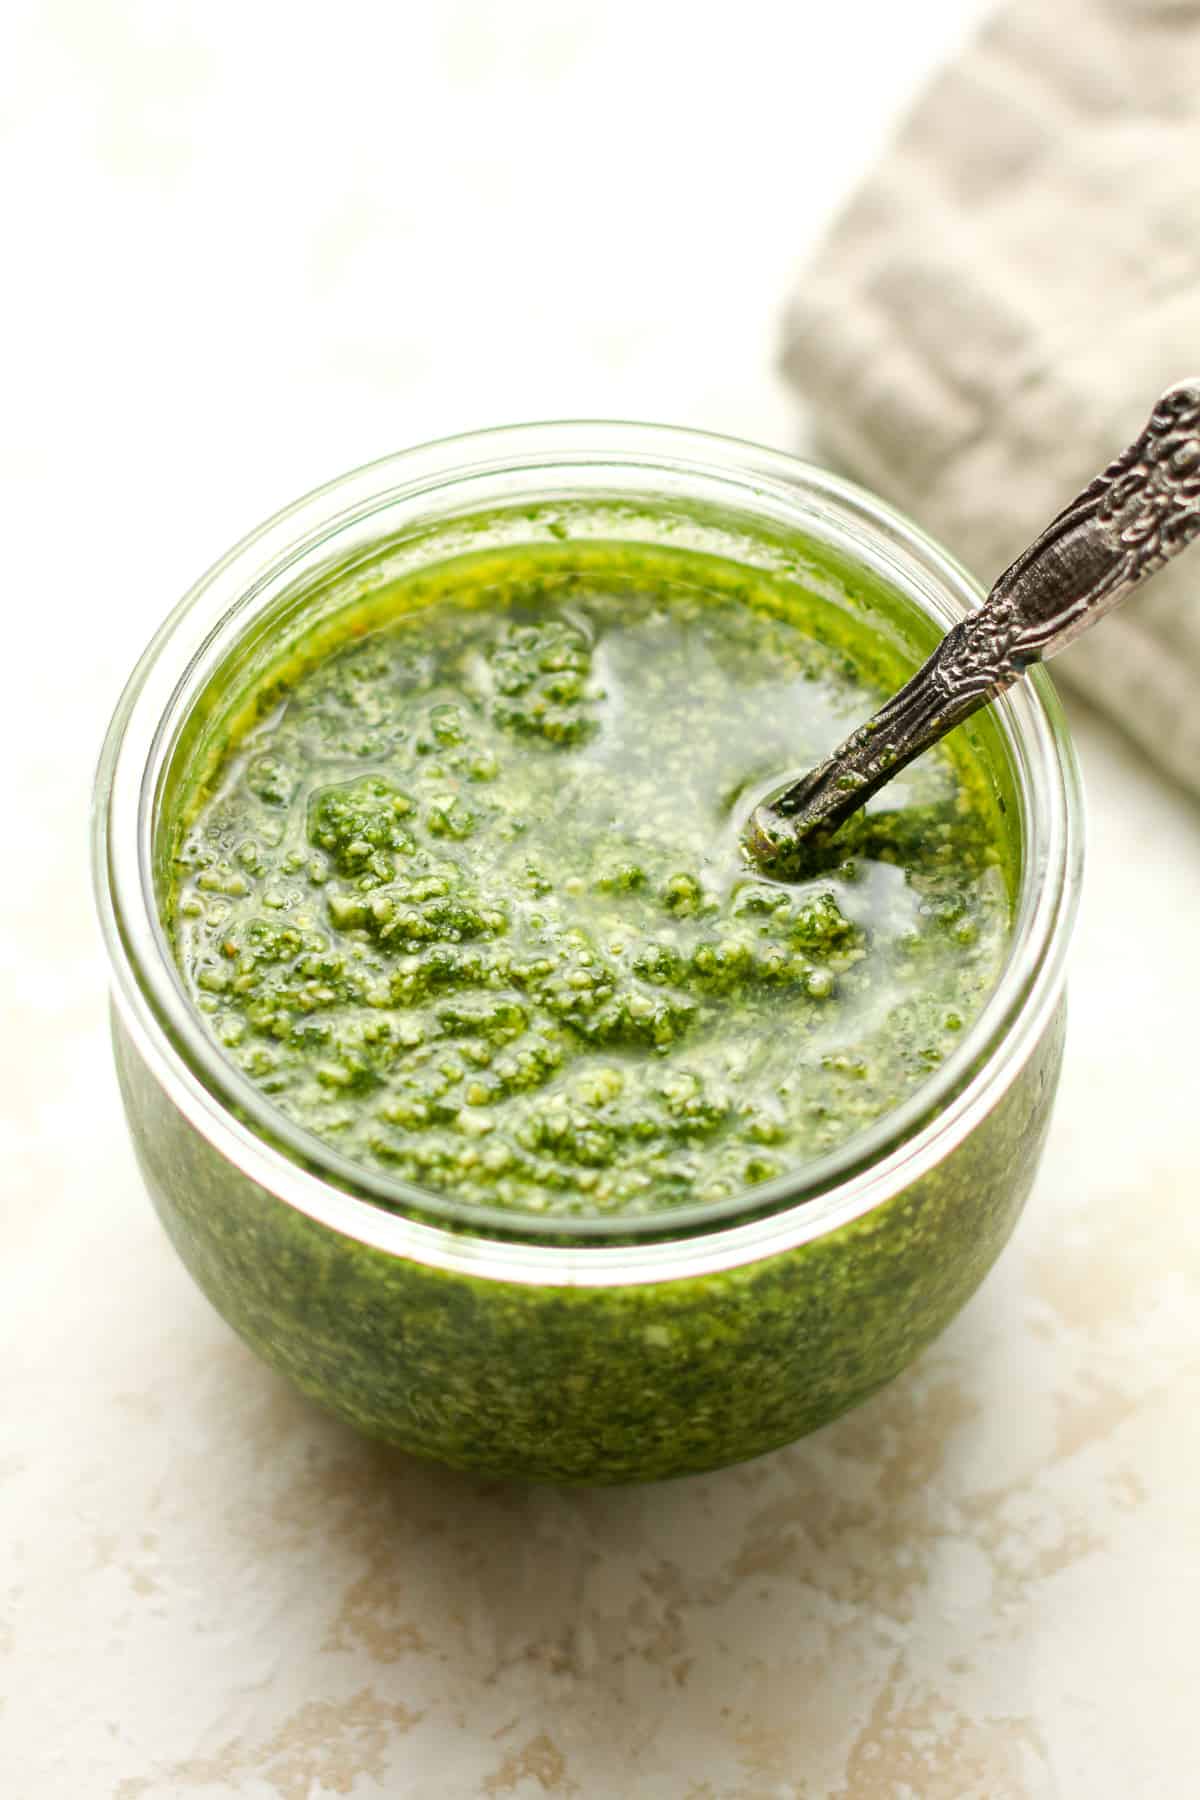 A jar of the homemade pesto sauce with a tablespoon.